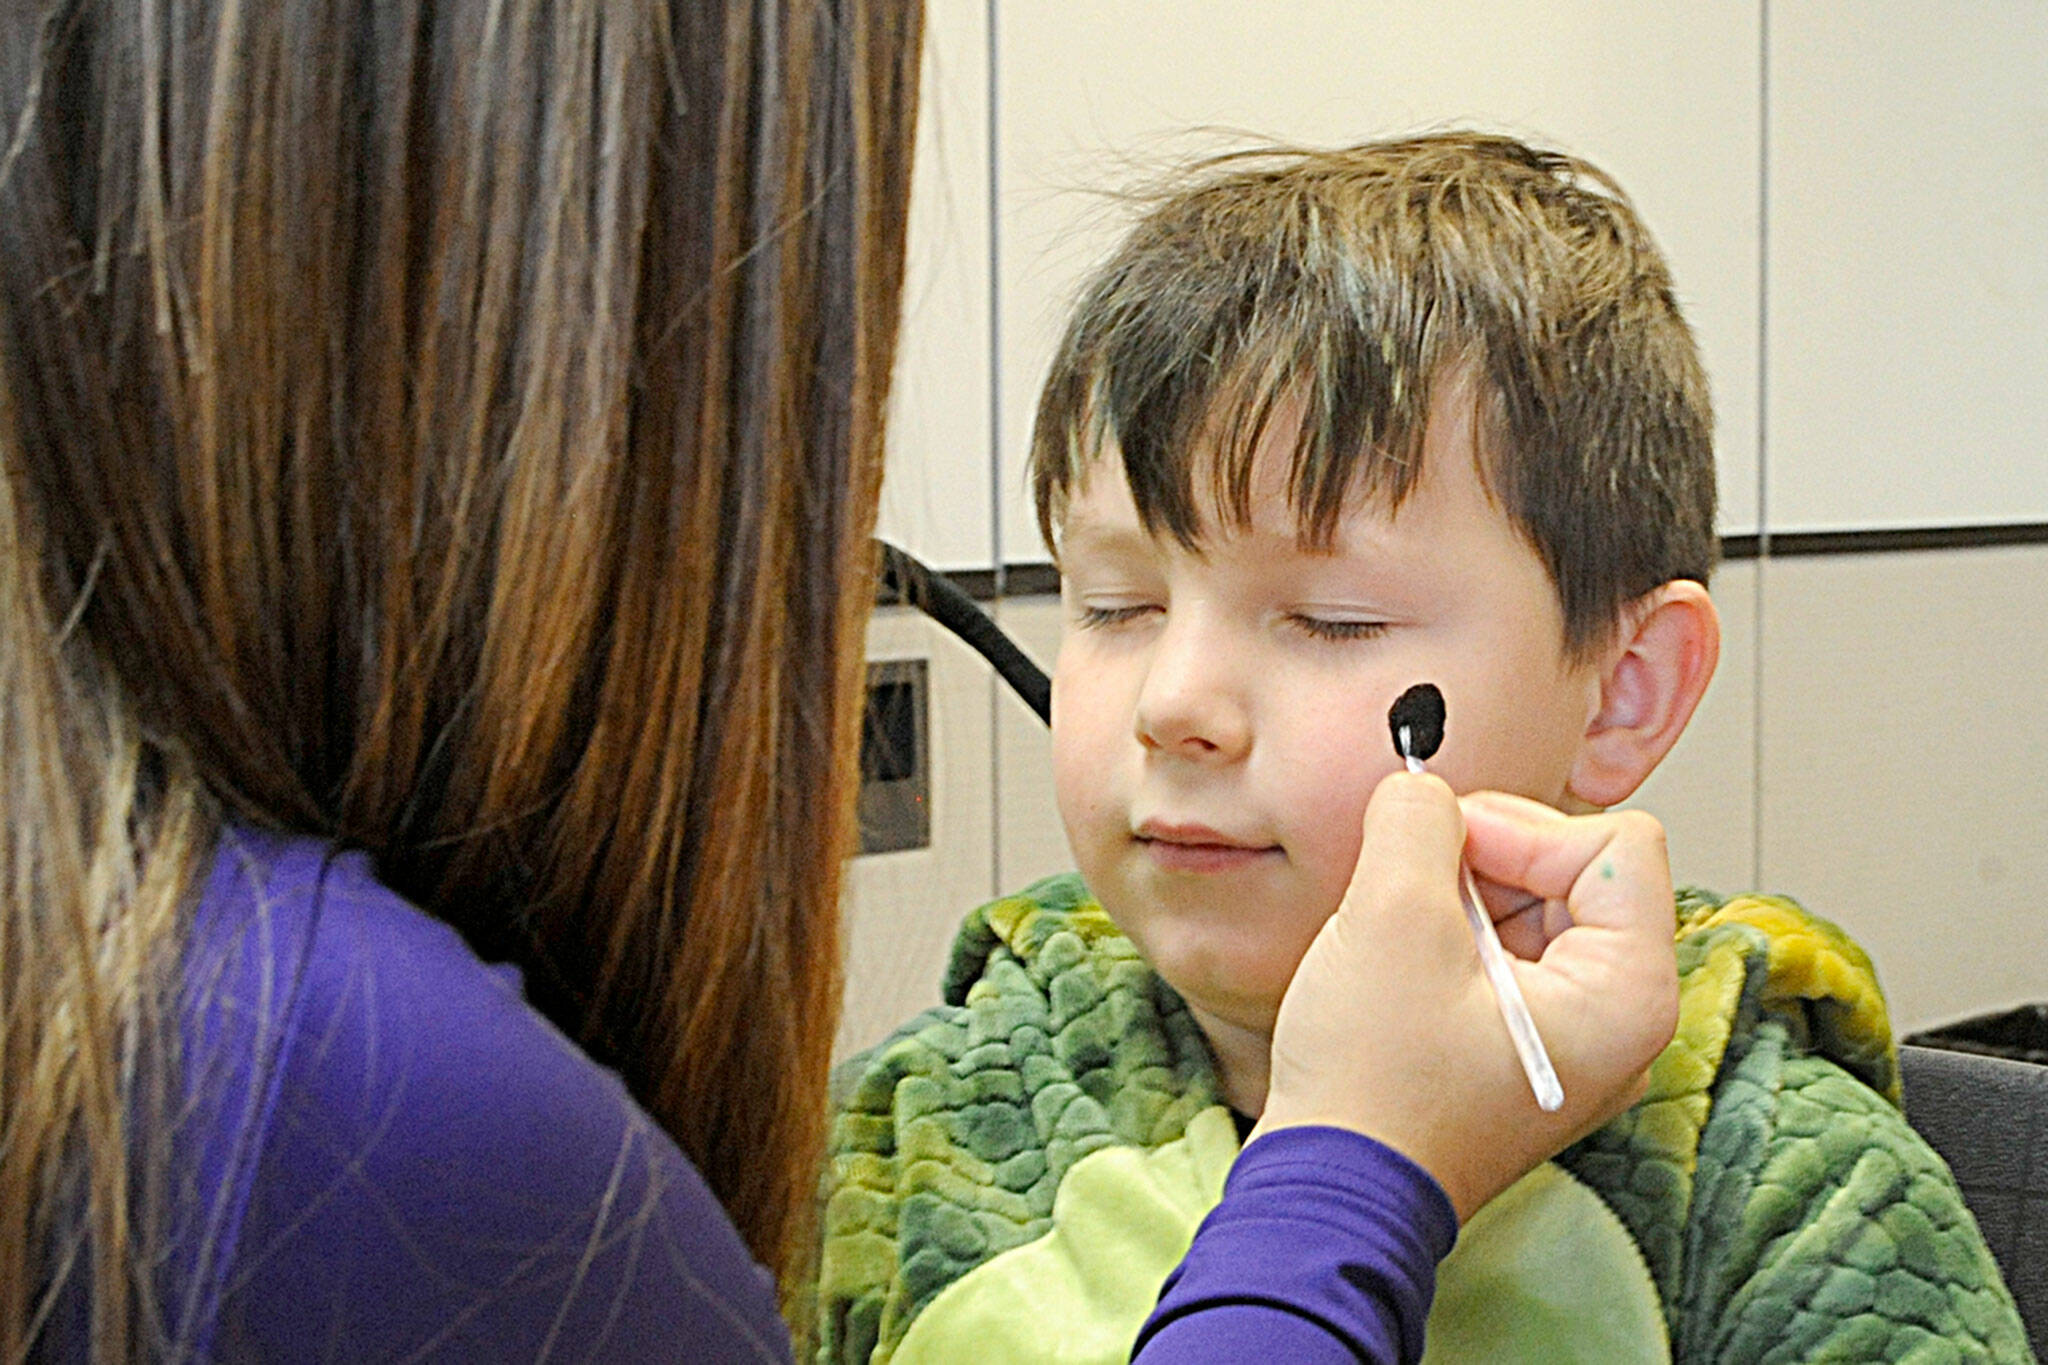 Sequim Gazette photo by Matthew Nash/ Five-year-old Bowie Dockery gets a spider painted on his face by Azalea Loveday, 14, at the Sequim High School Haunted Hallways event. Loveday was one of many cheerleaders offering festive face painting.